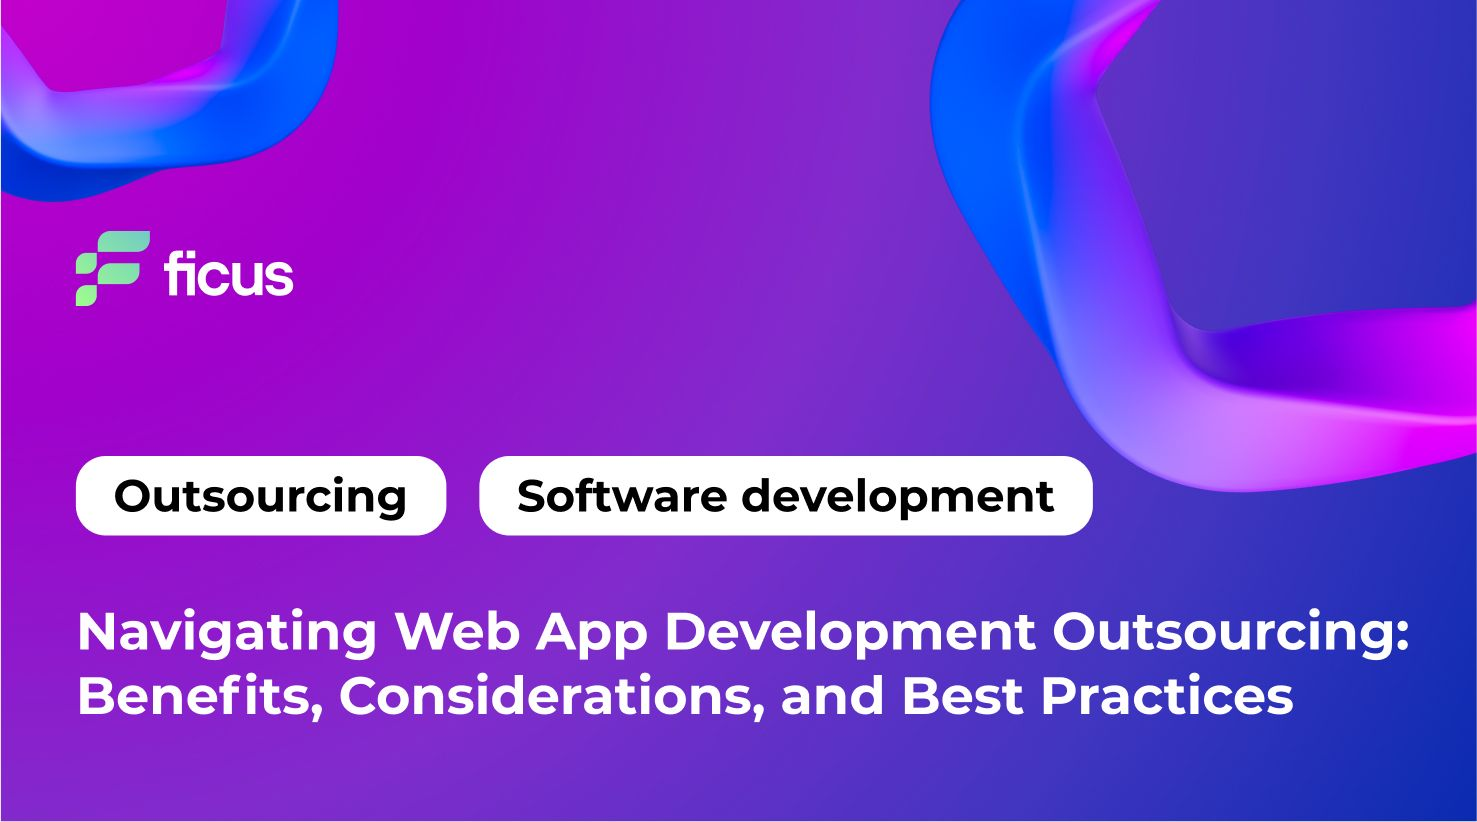 Navigating Web App Development Outsourcing: Benefits, Considerations, and Best Practices